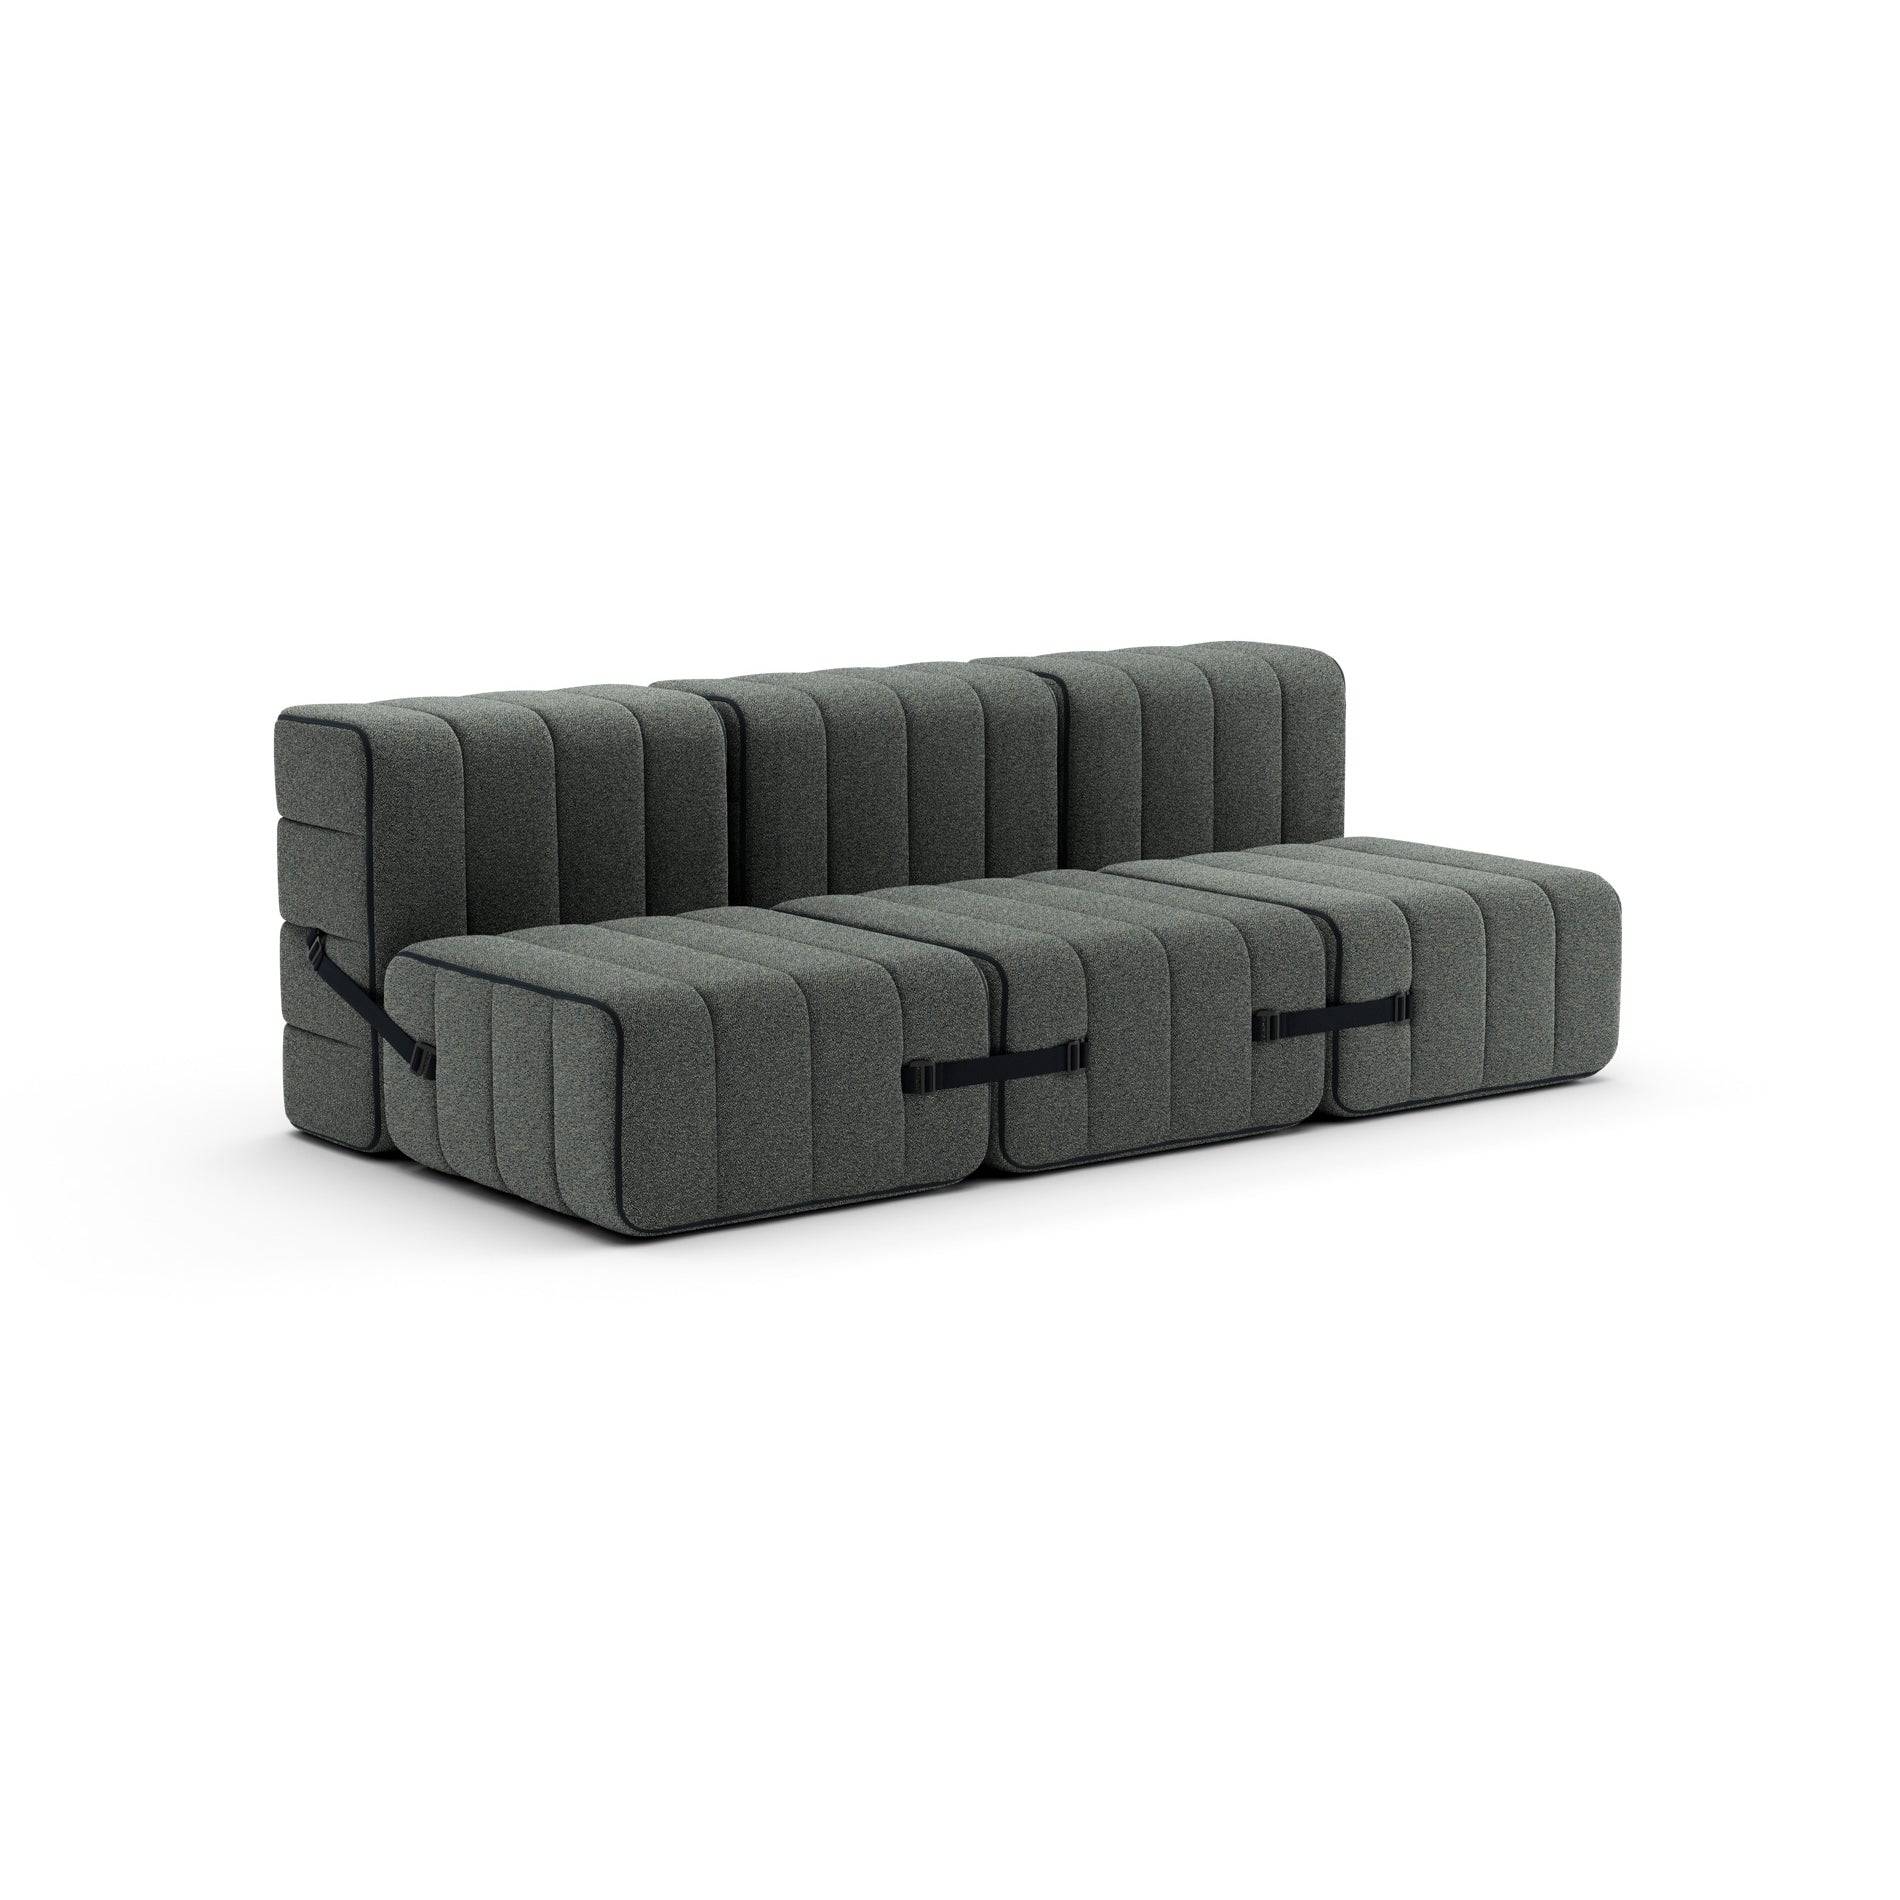 Curt Sofa System - Gravel - THAT COOL LIVING